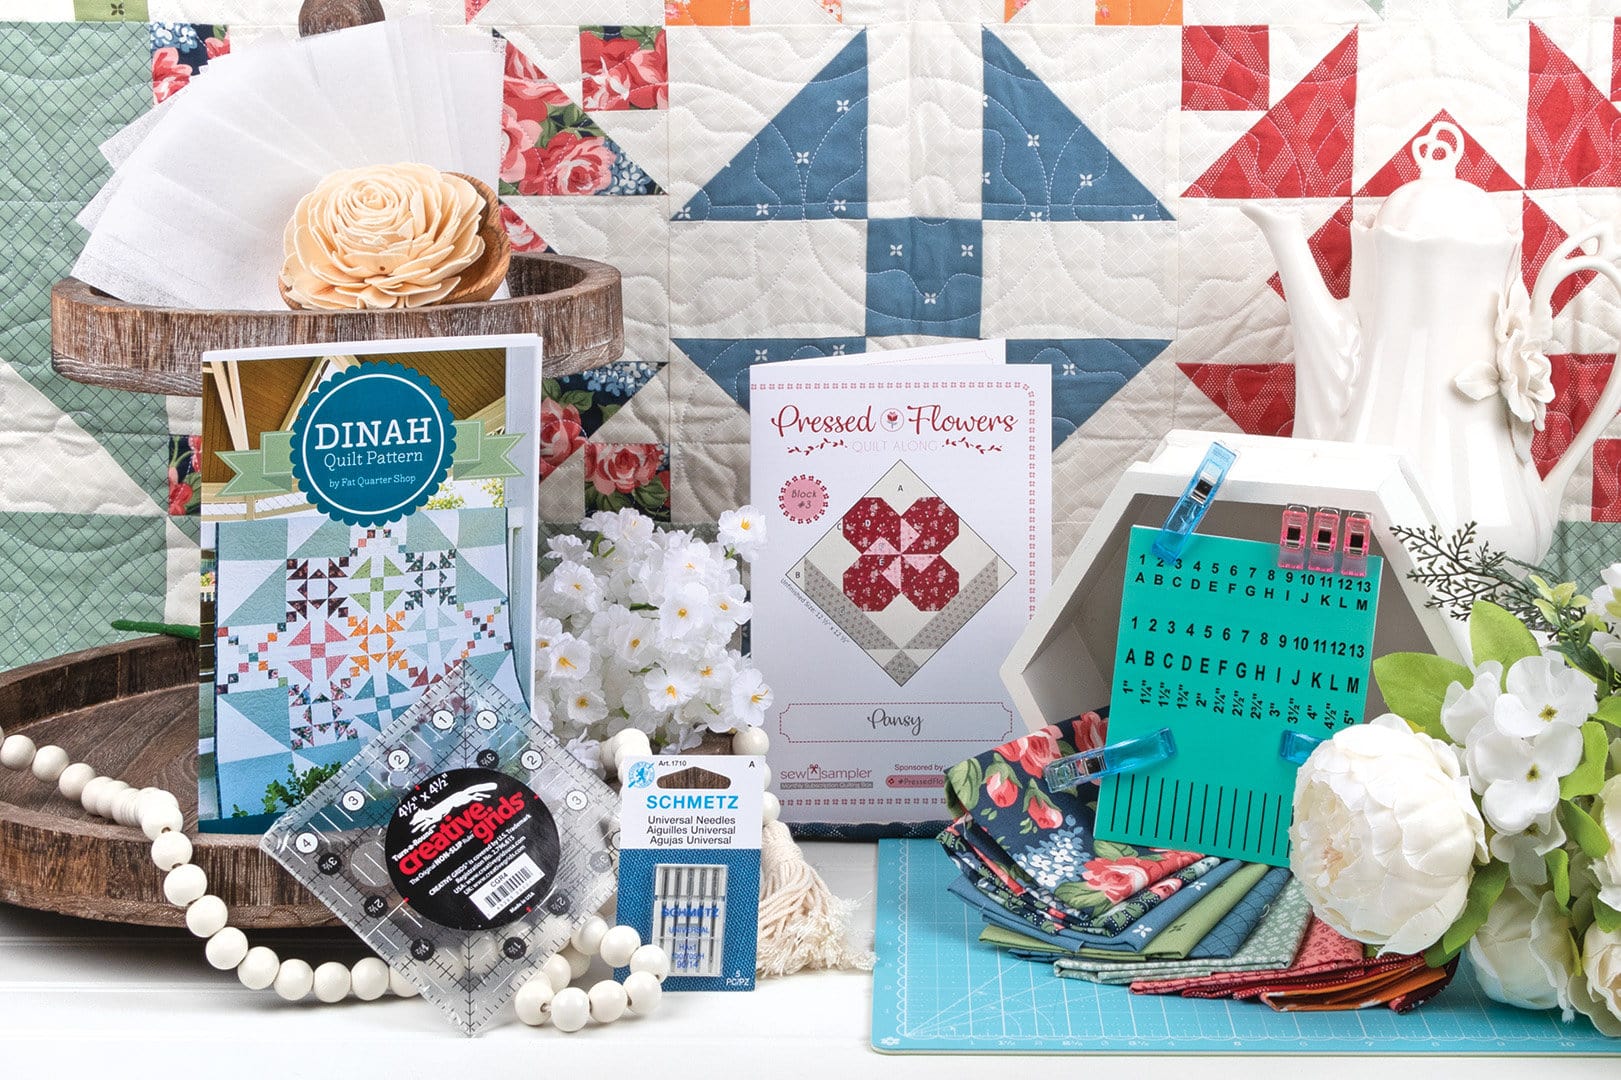 Sew Sampler July 2022 Box Reveal - The Jolly Jabber Quilting Blog